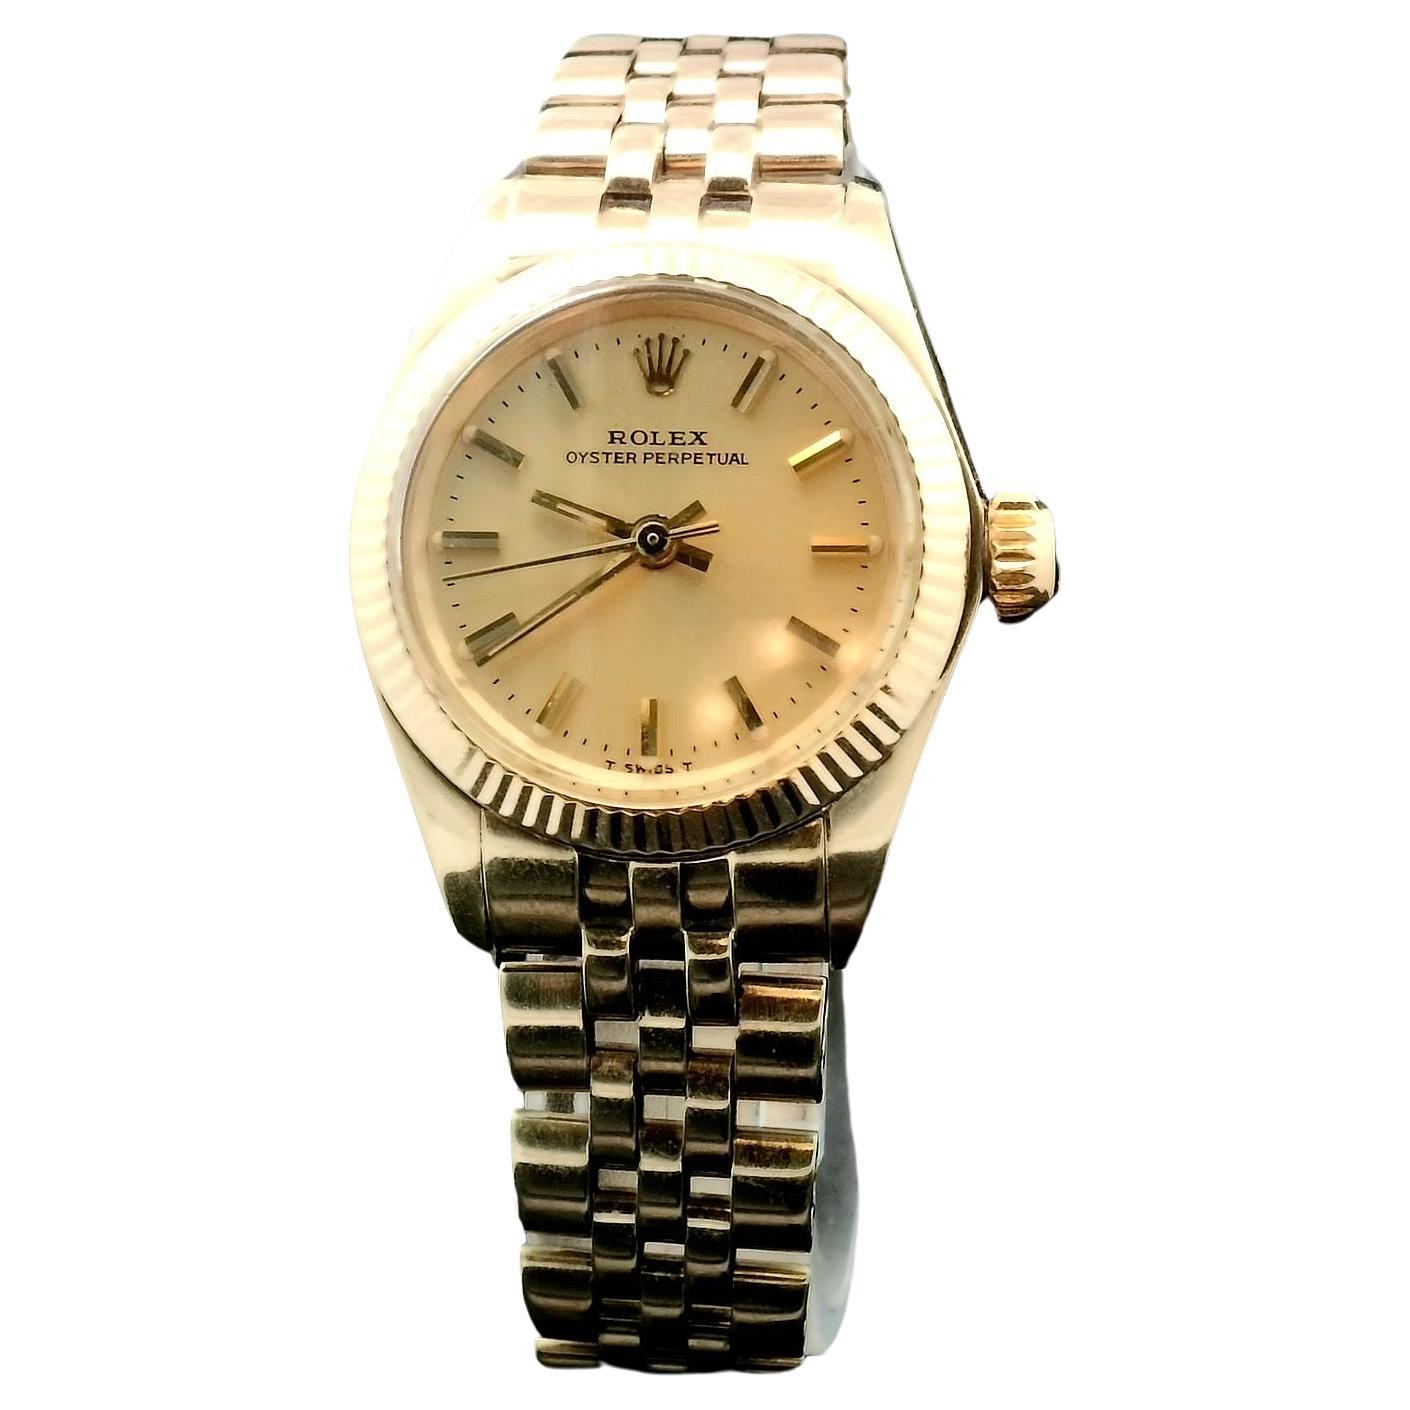 Vintage 1983 Ladies Rolex Gold Jubilee Watch *No Papers For Sale